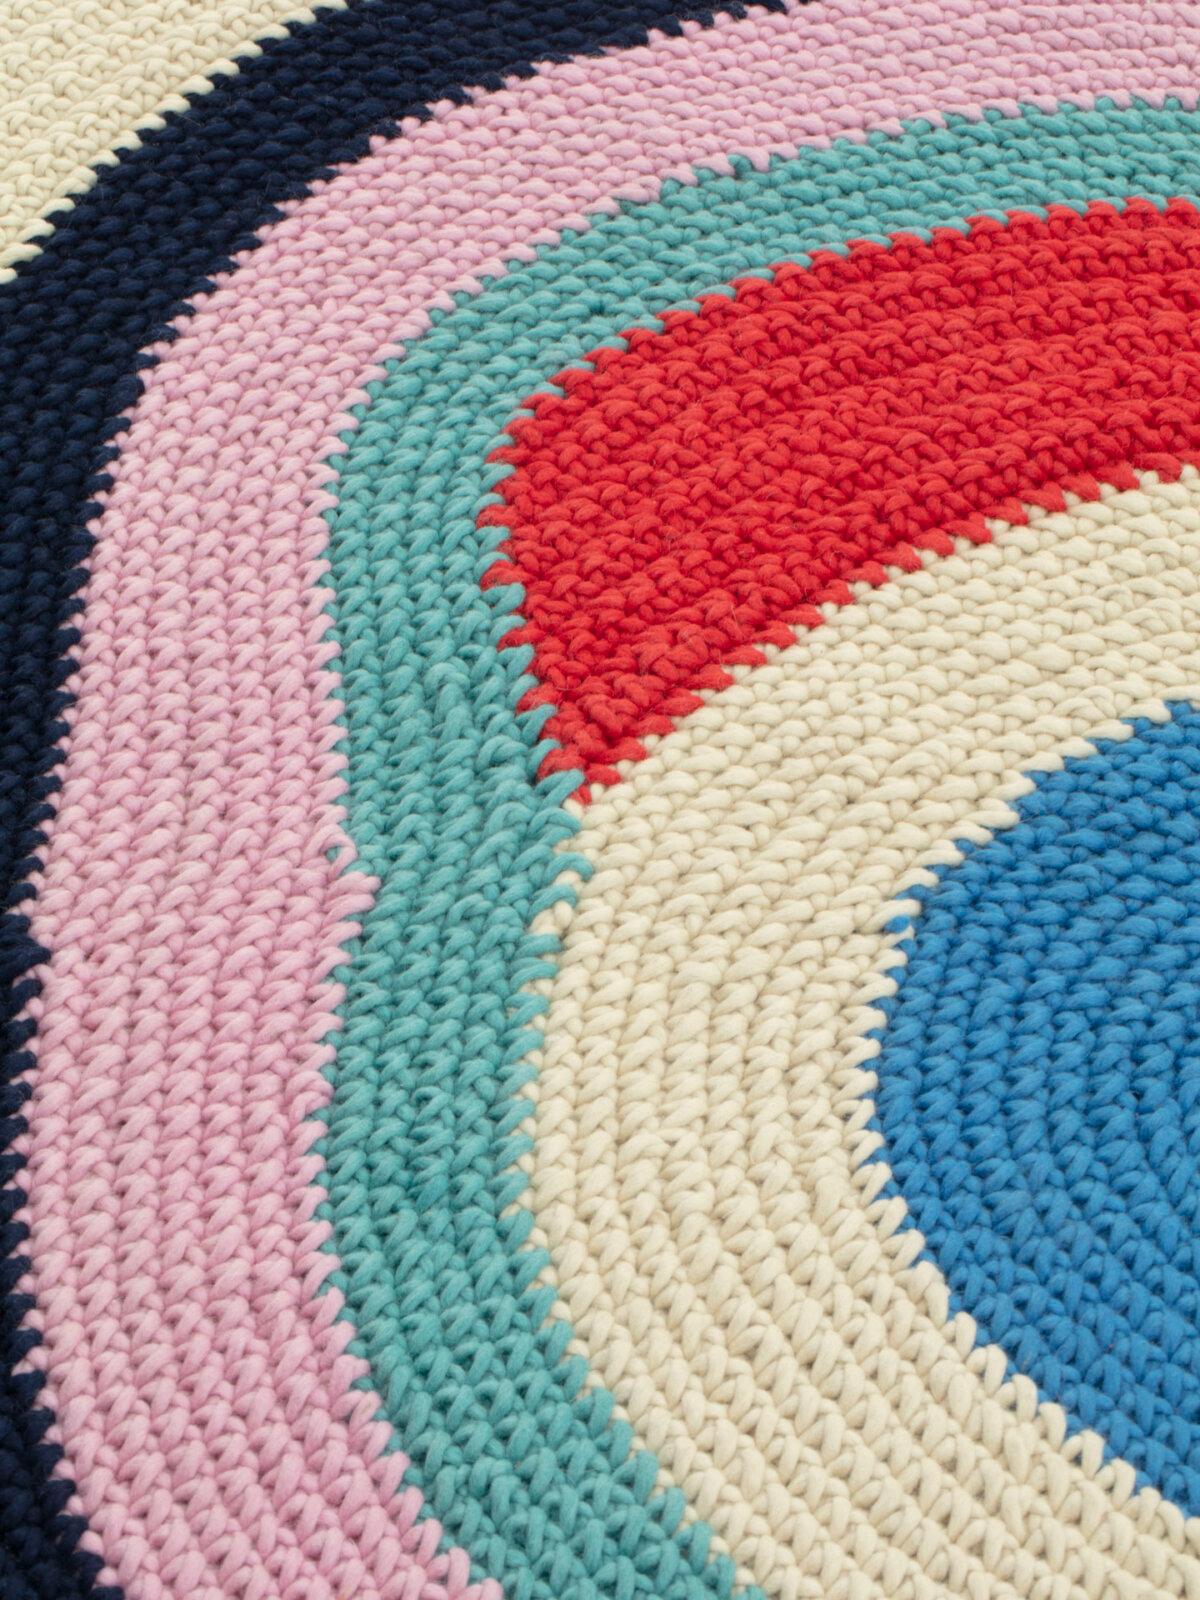 Loopy is a rug designed by designer Clara von Zweigbergk for the CC-Tapis brand. Loopy is a rug from the Loopy Collection that includes three Loopy rugs of different shapes: square, rectangular and oval.

Made of wool and worked with the crochet